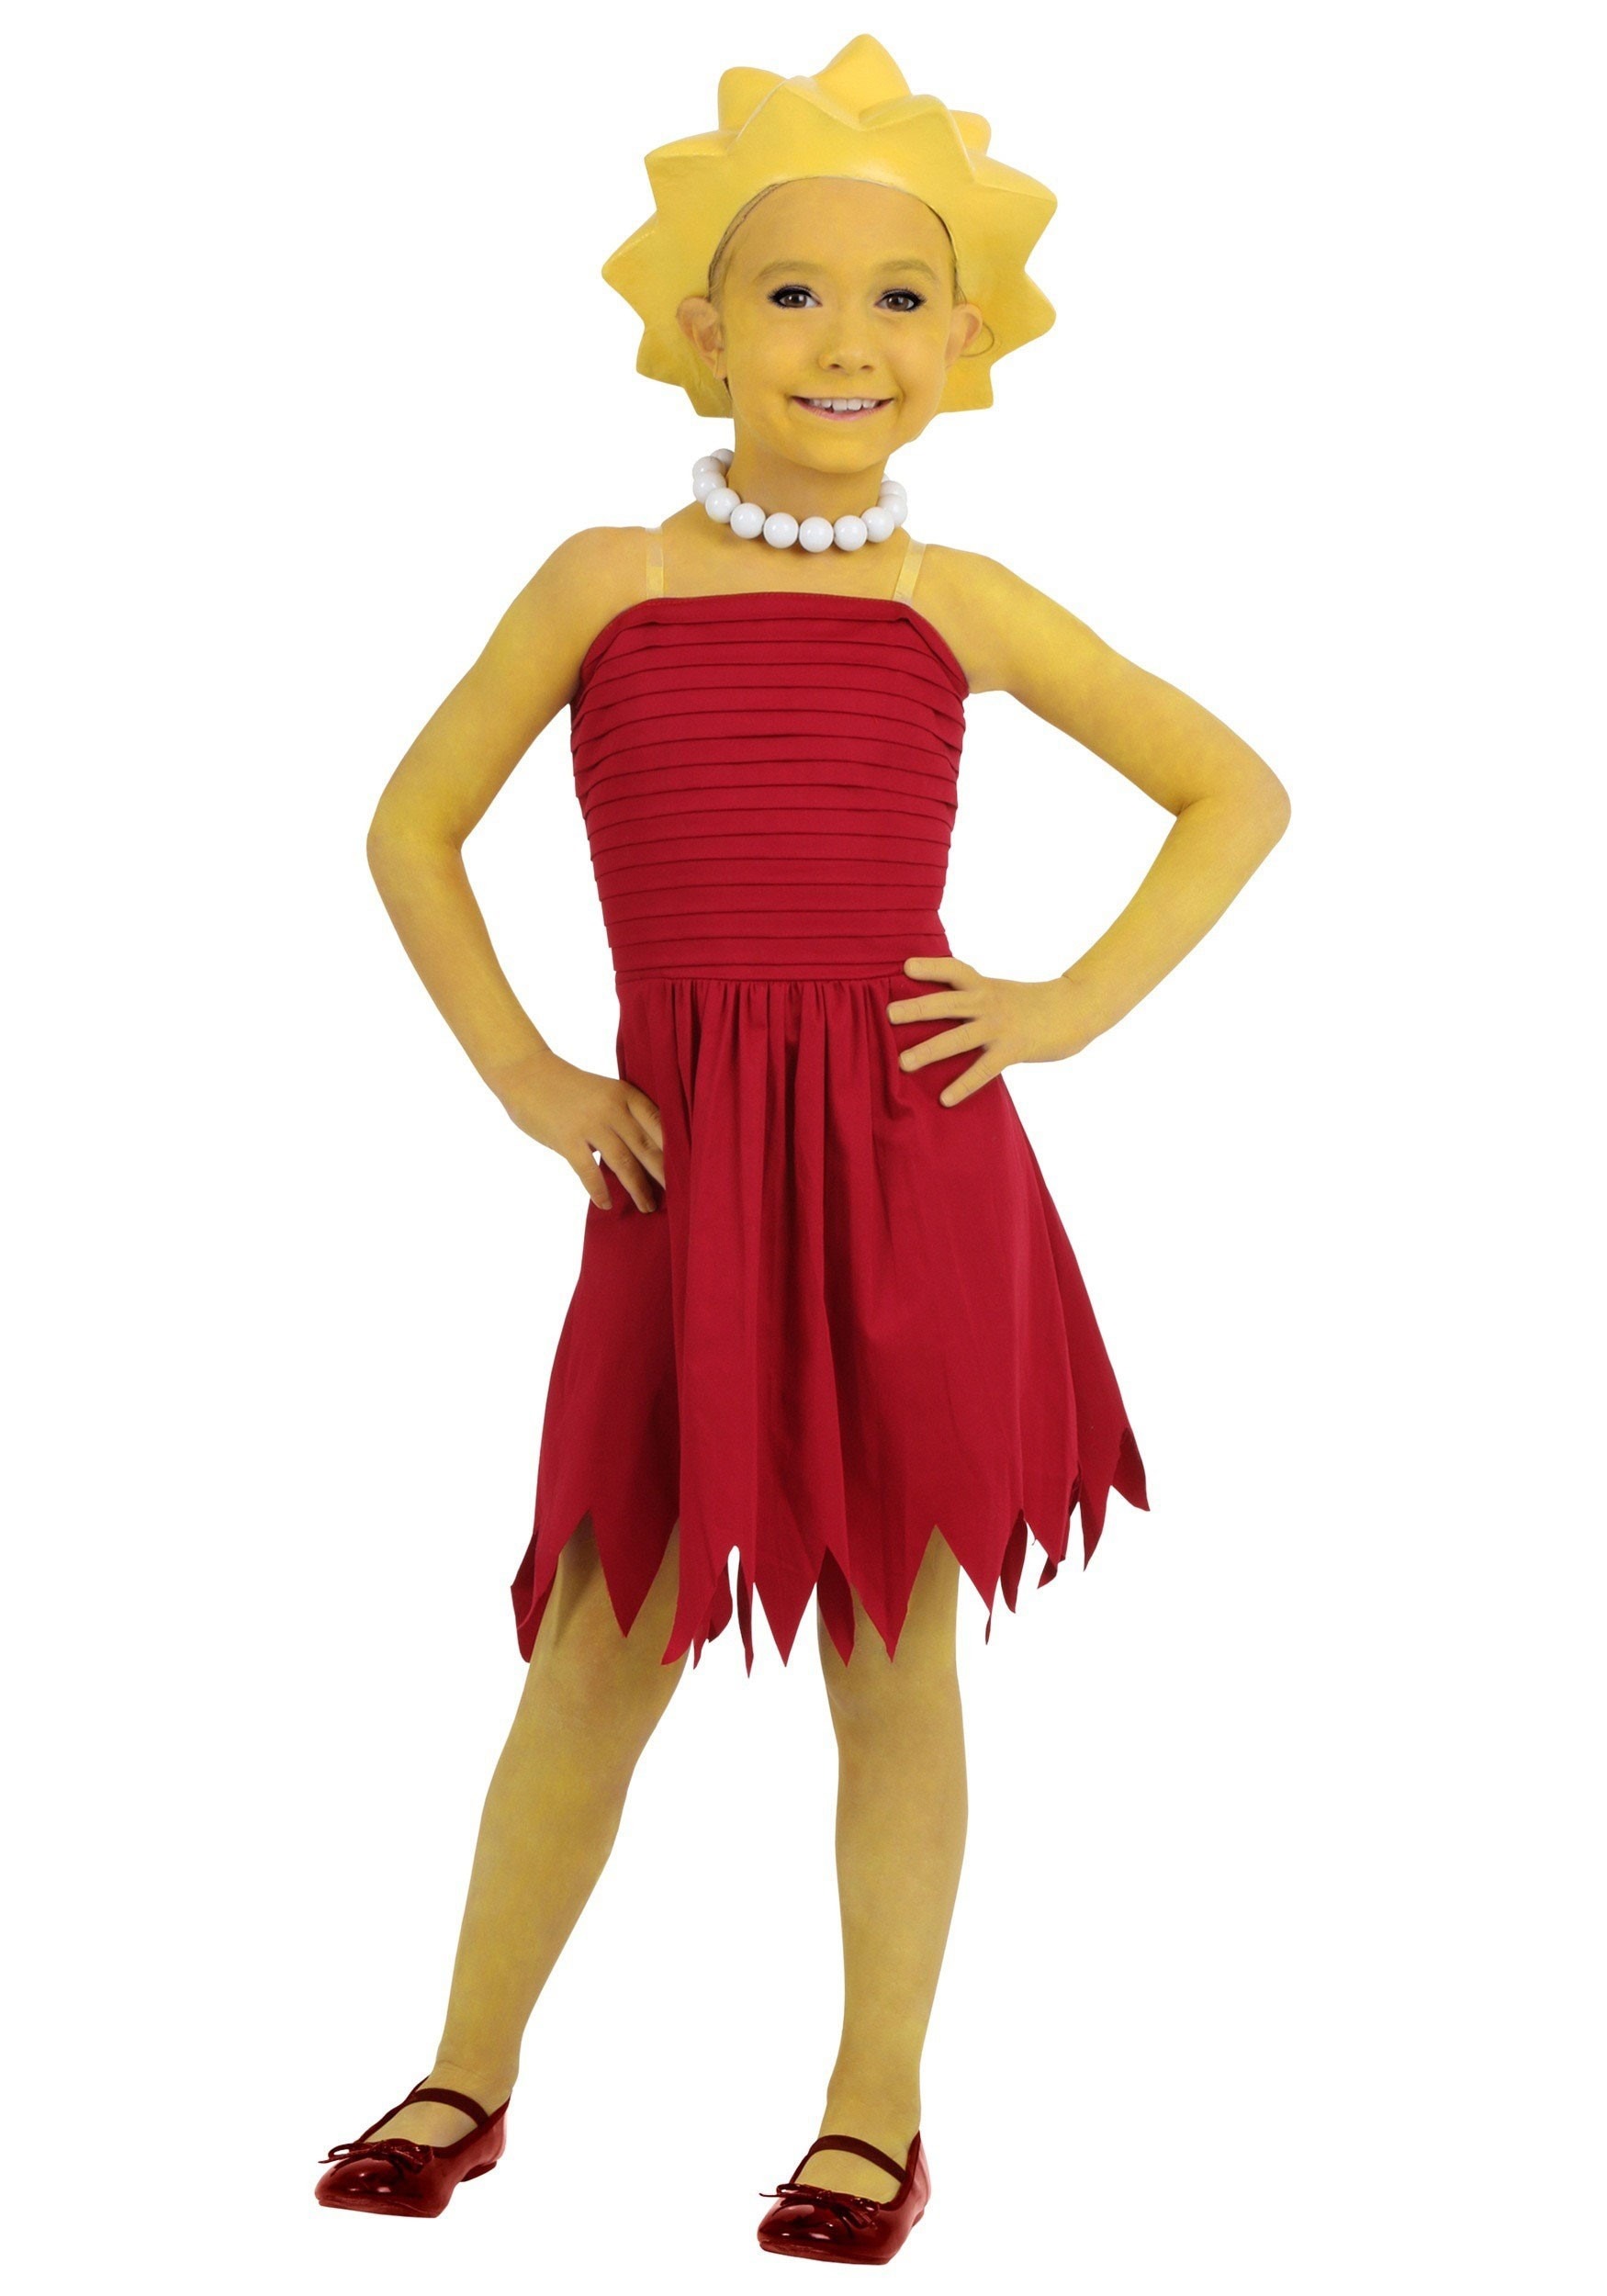 Child Lisa Simpson Costume from The Simpsons